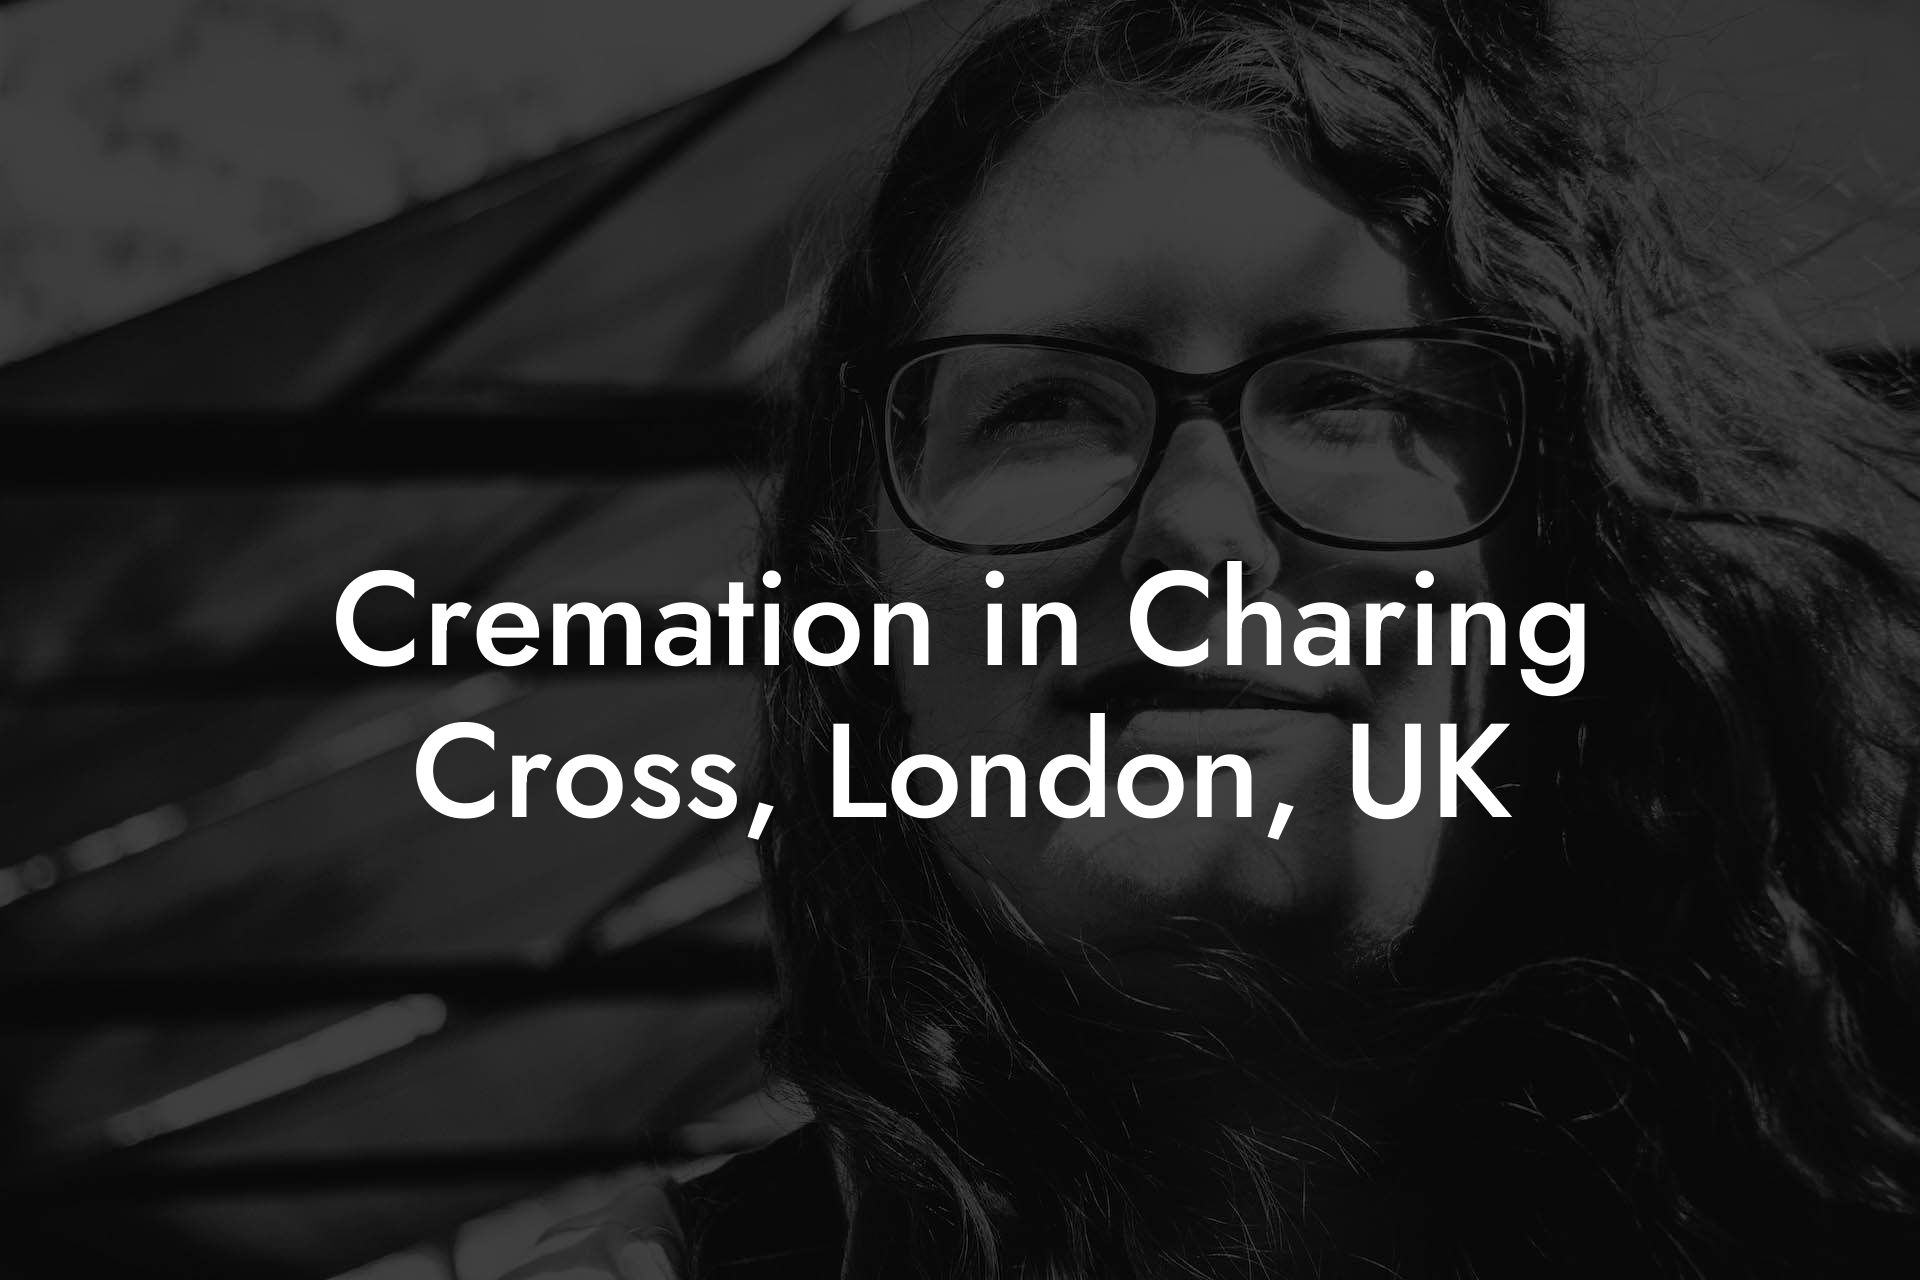 Cremation in Charing Cross, London, UK